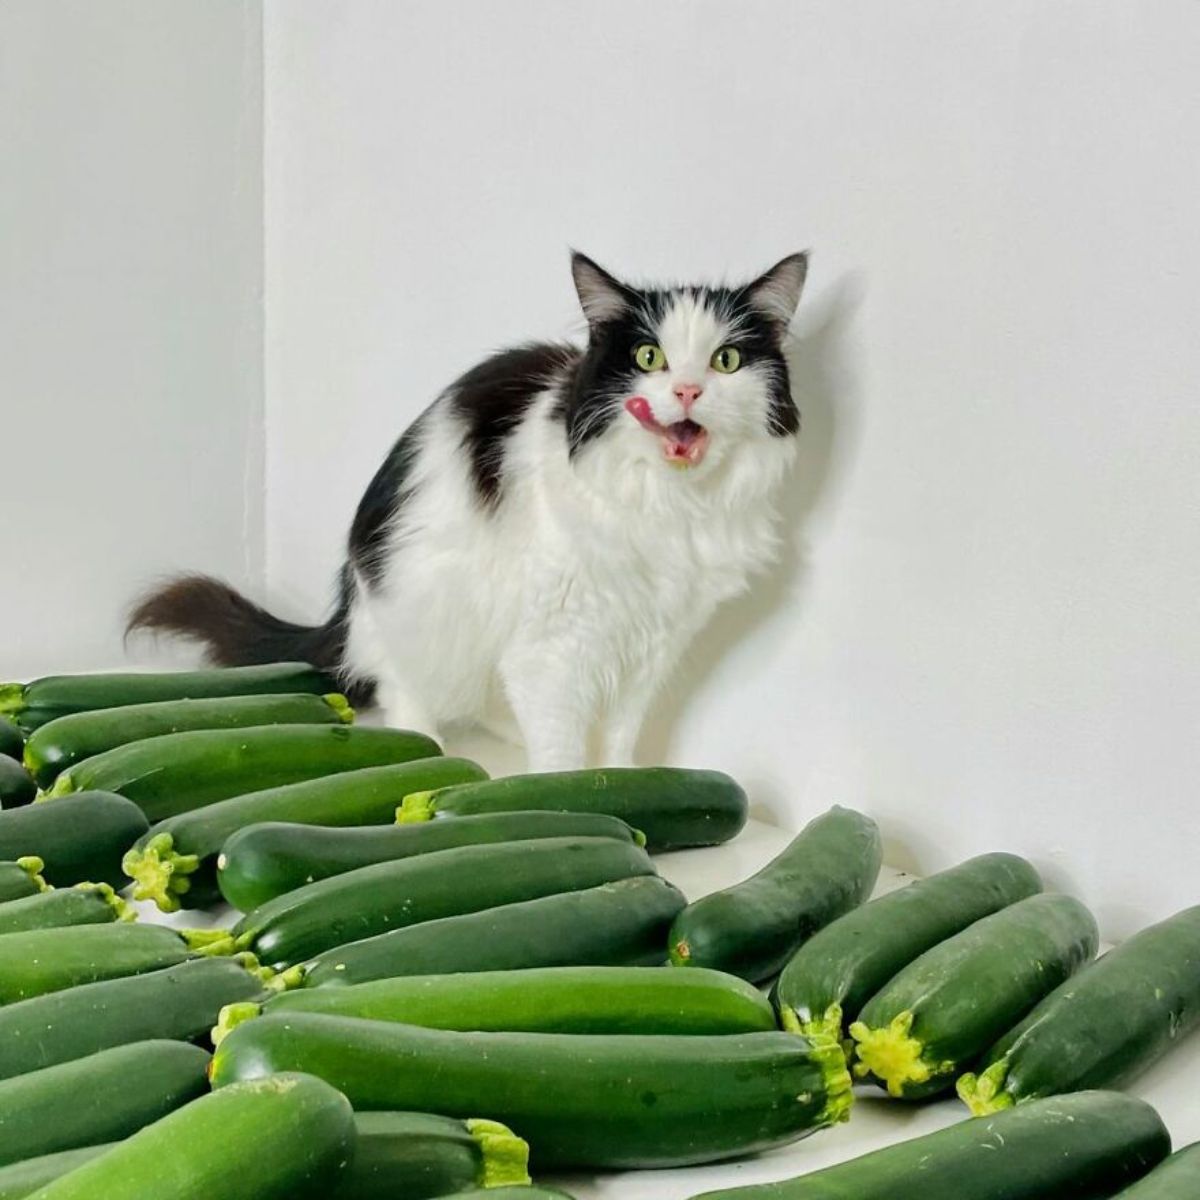 black and white fluffy cat sitting on a table full of green courgettes and the cat has its tongue out